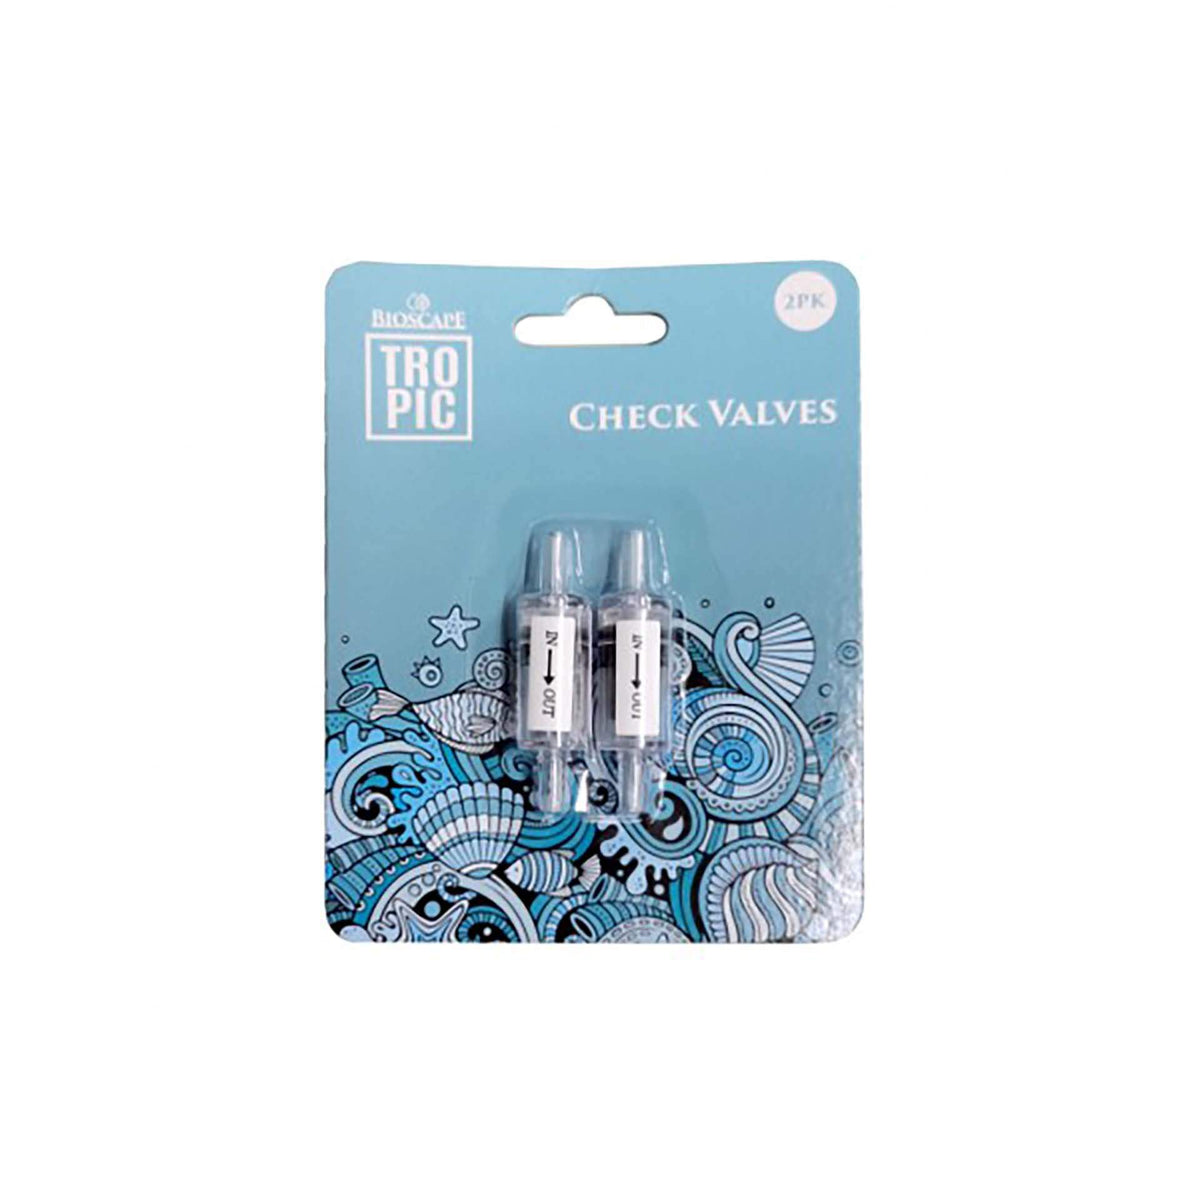 Bioscape Airline Check Valves - Pack of Two